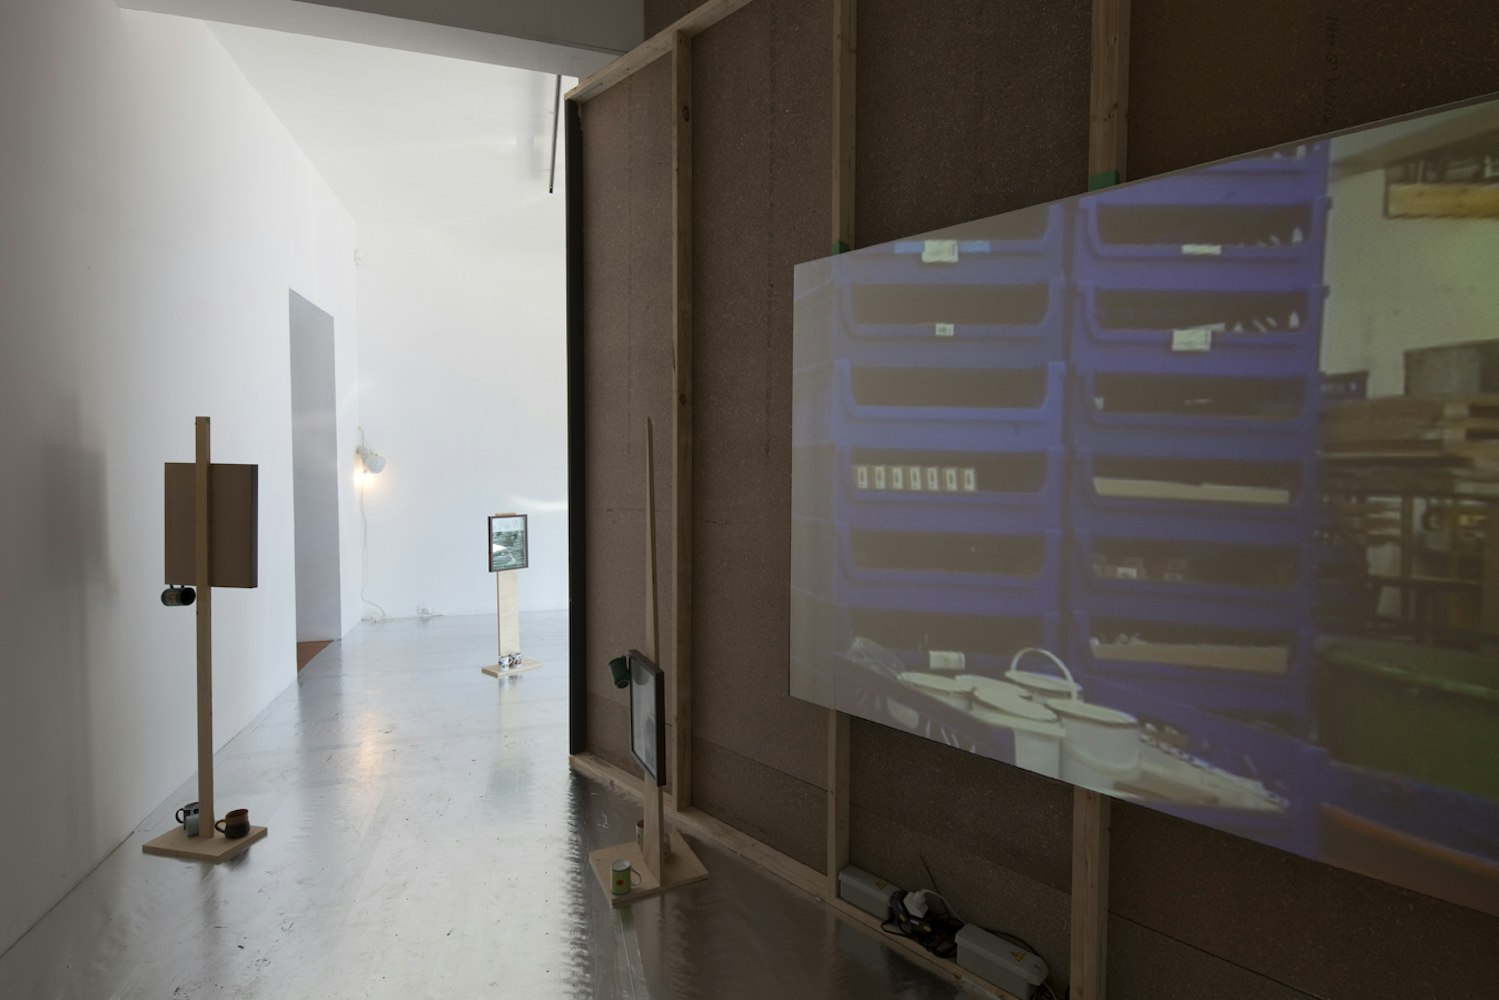 Installation view of Creation Science at Gertrude Contemporary, 2010.